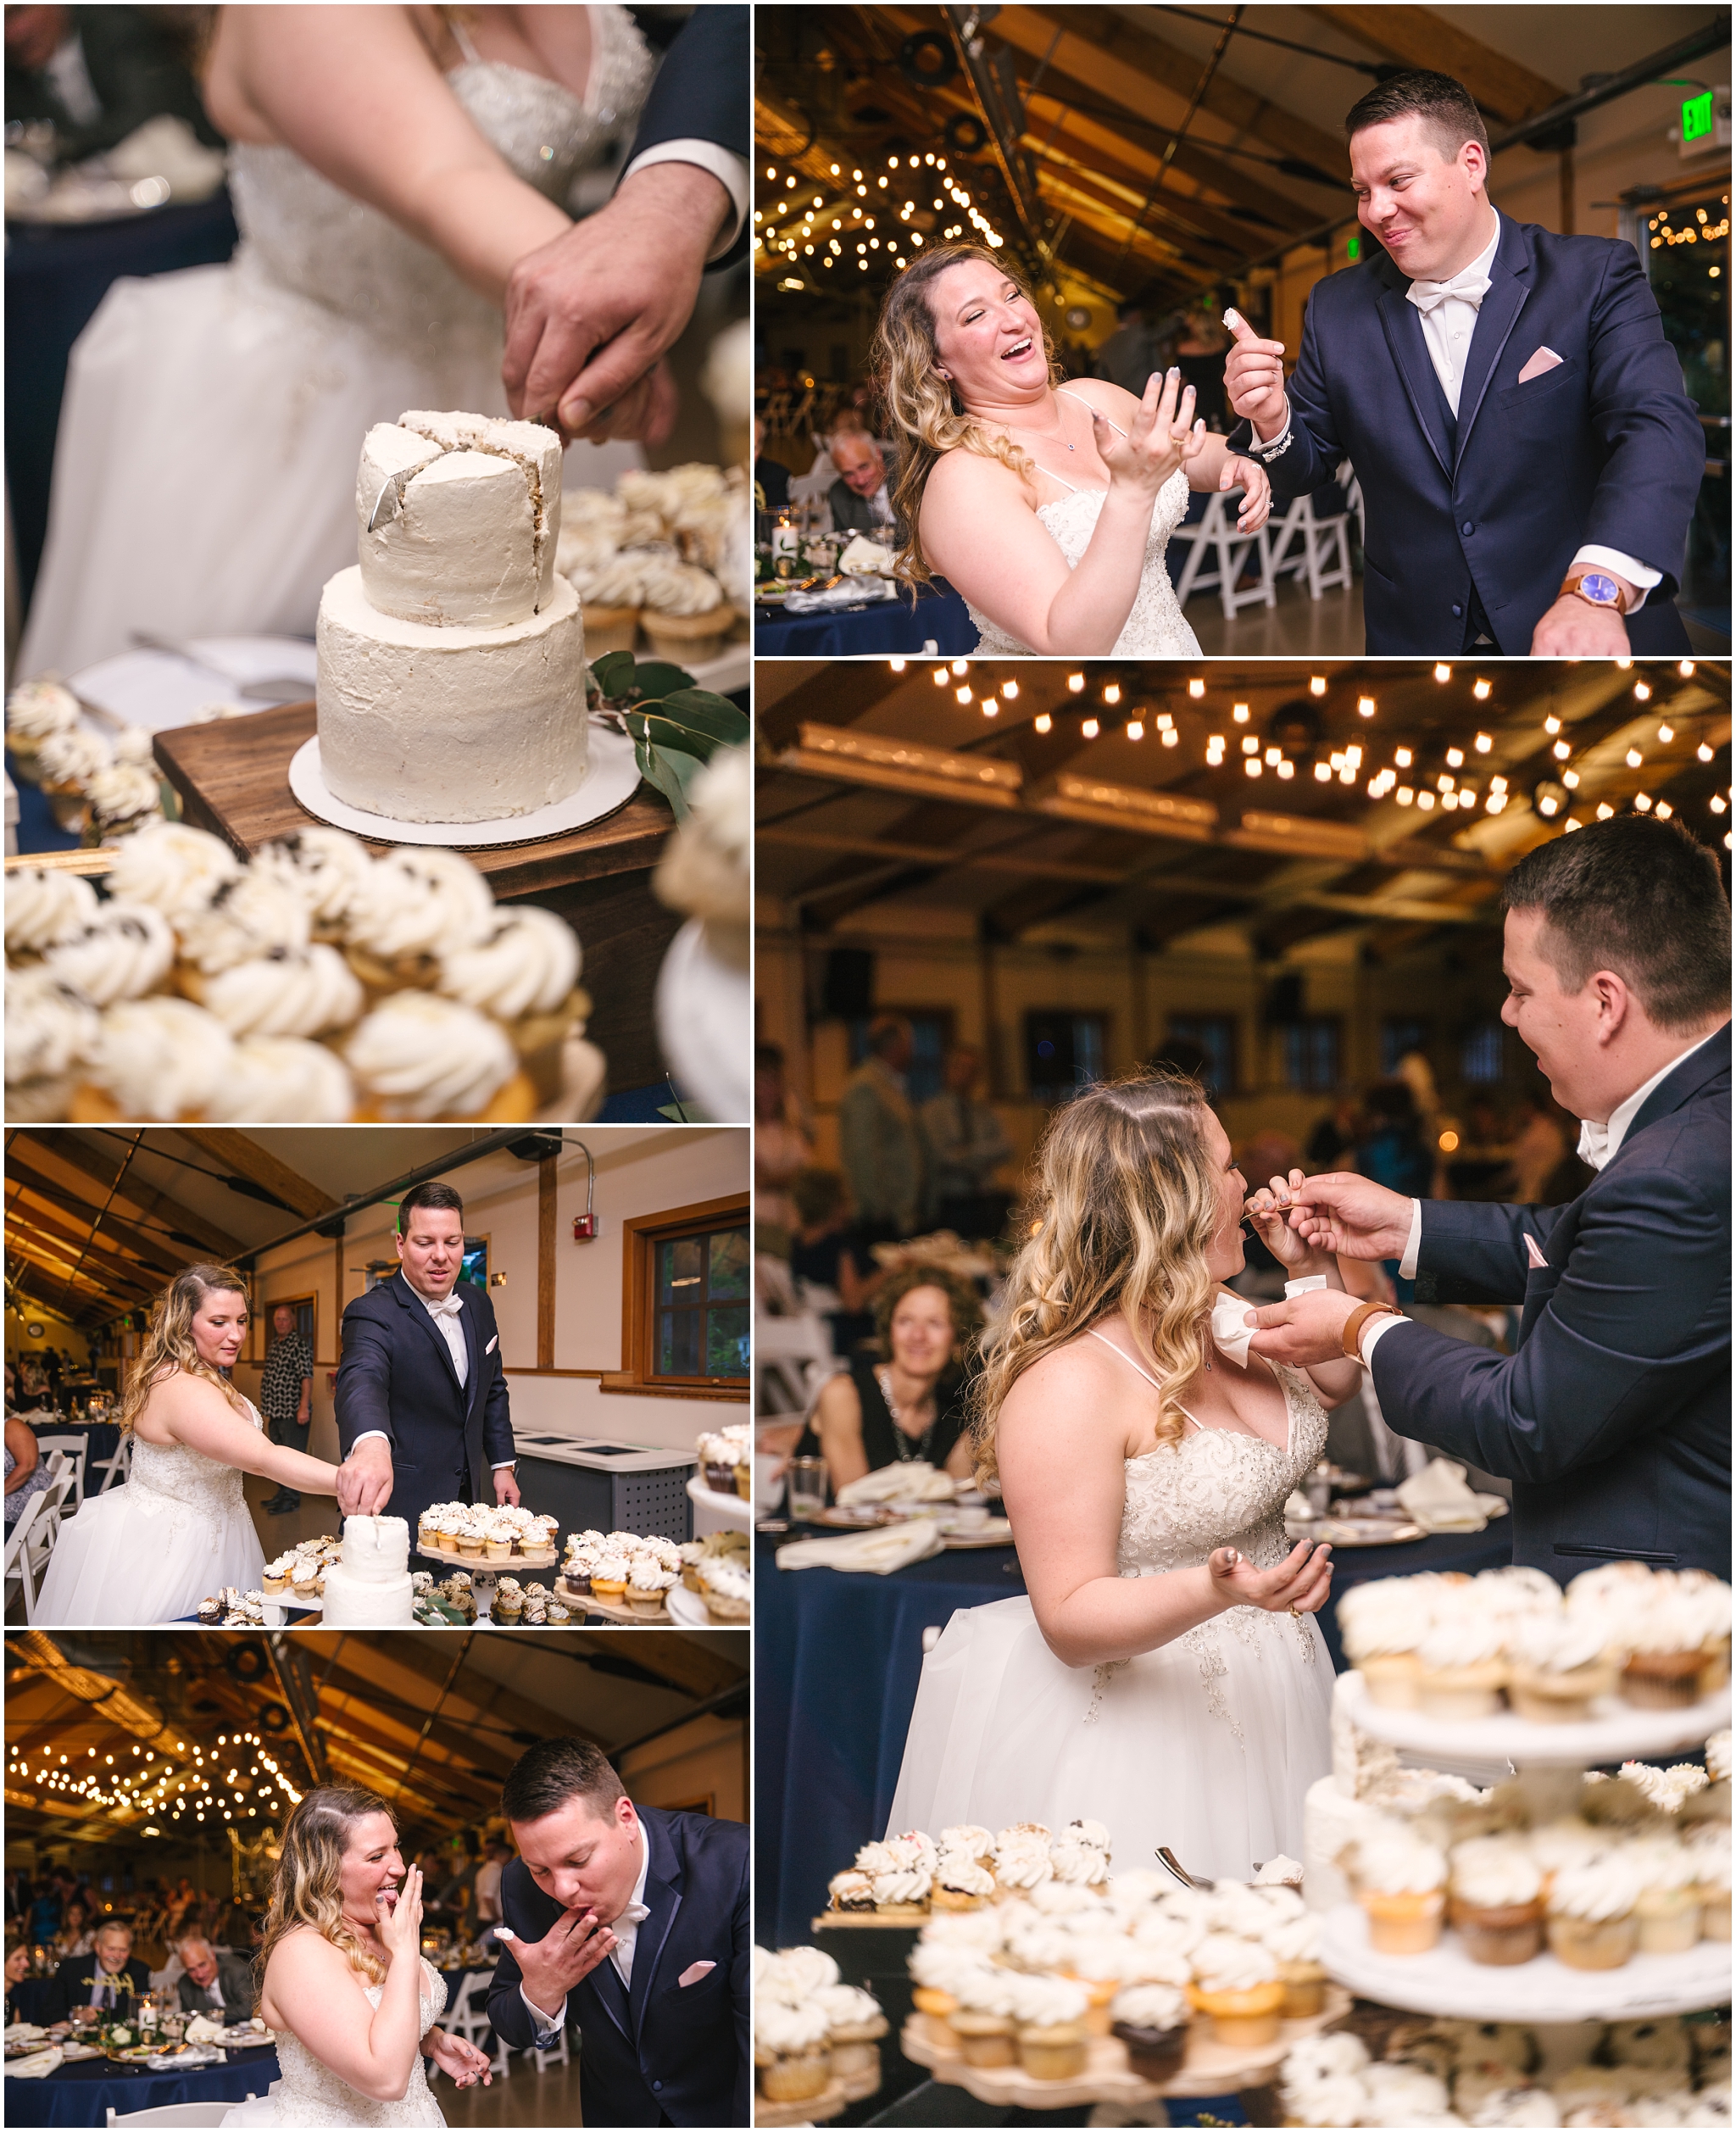 Kaela and Keith feed each other Gracene's Cupcakes at Pickering Barn wedding in Issaquah Washington